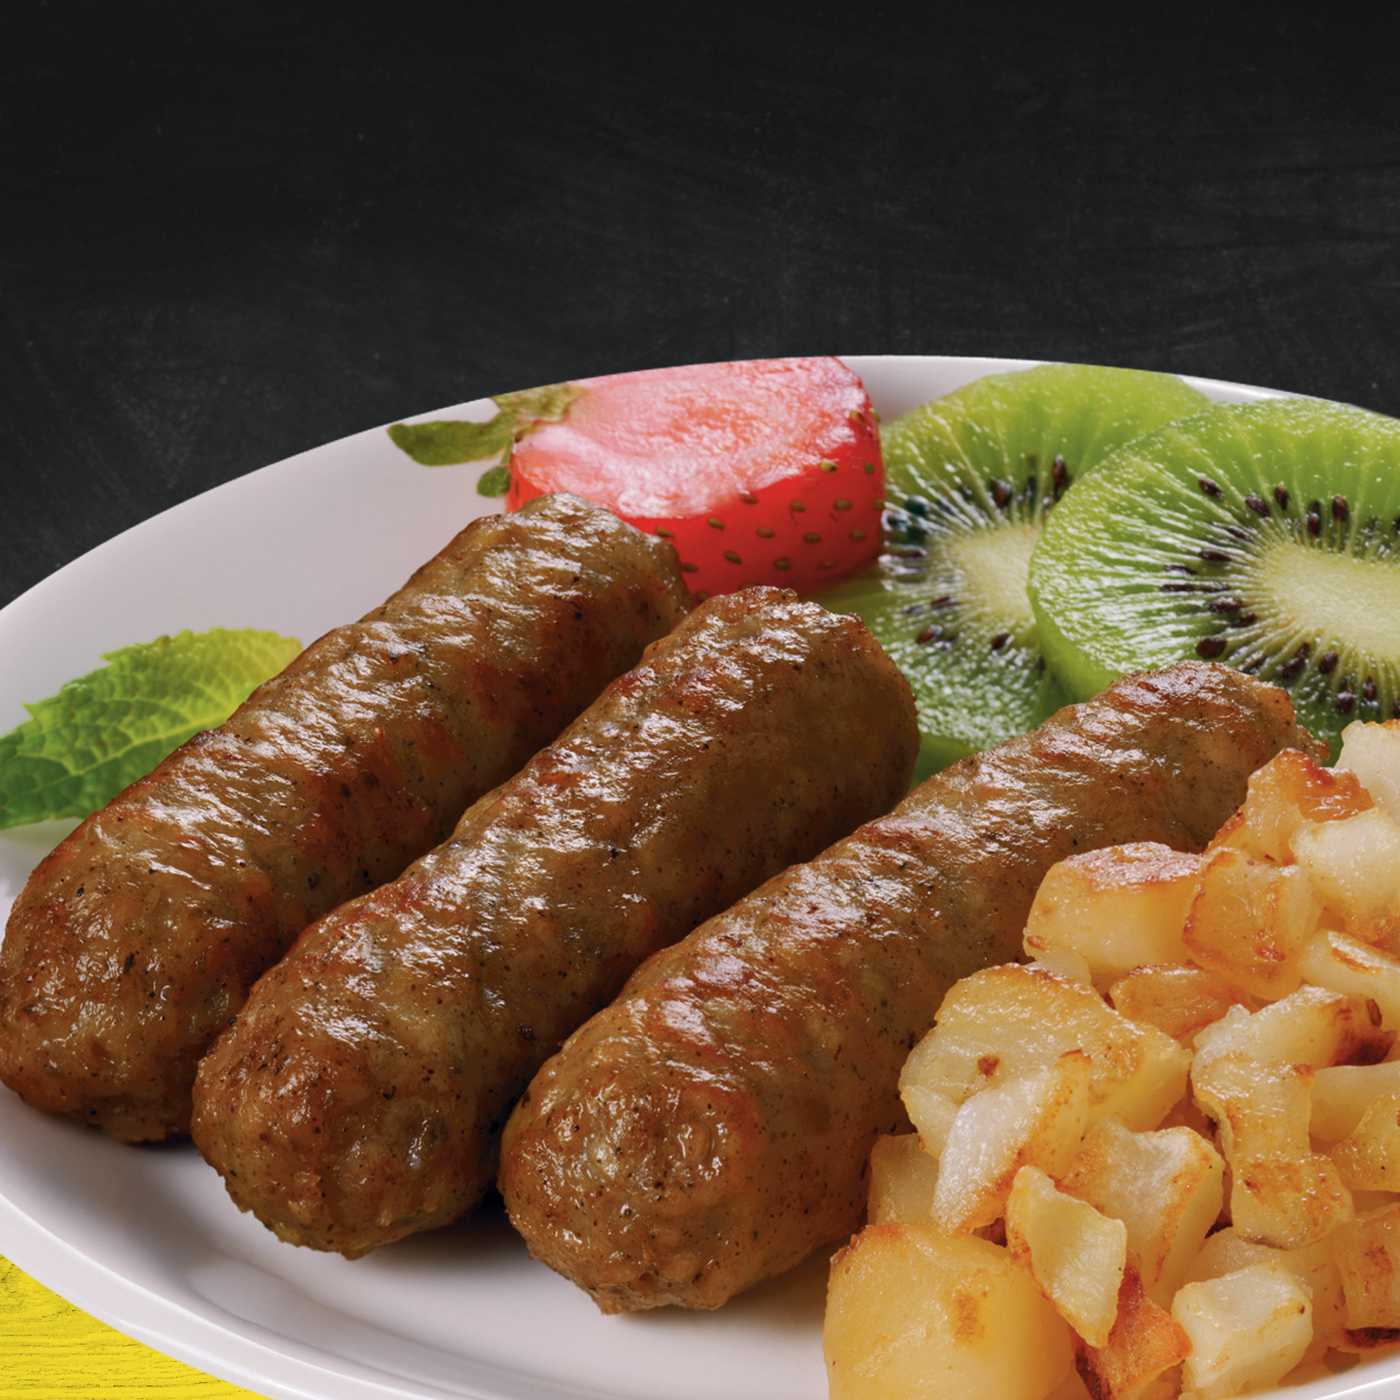 Banquet Brown ‘N Serve Fully Cooked Beef Sausage Links; image 3 of 6